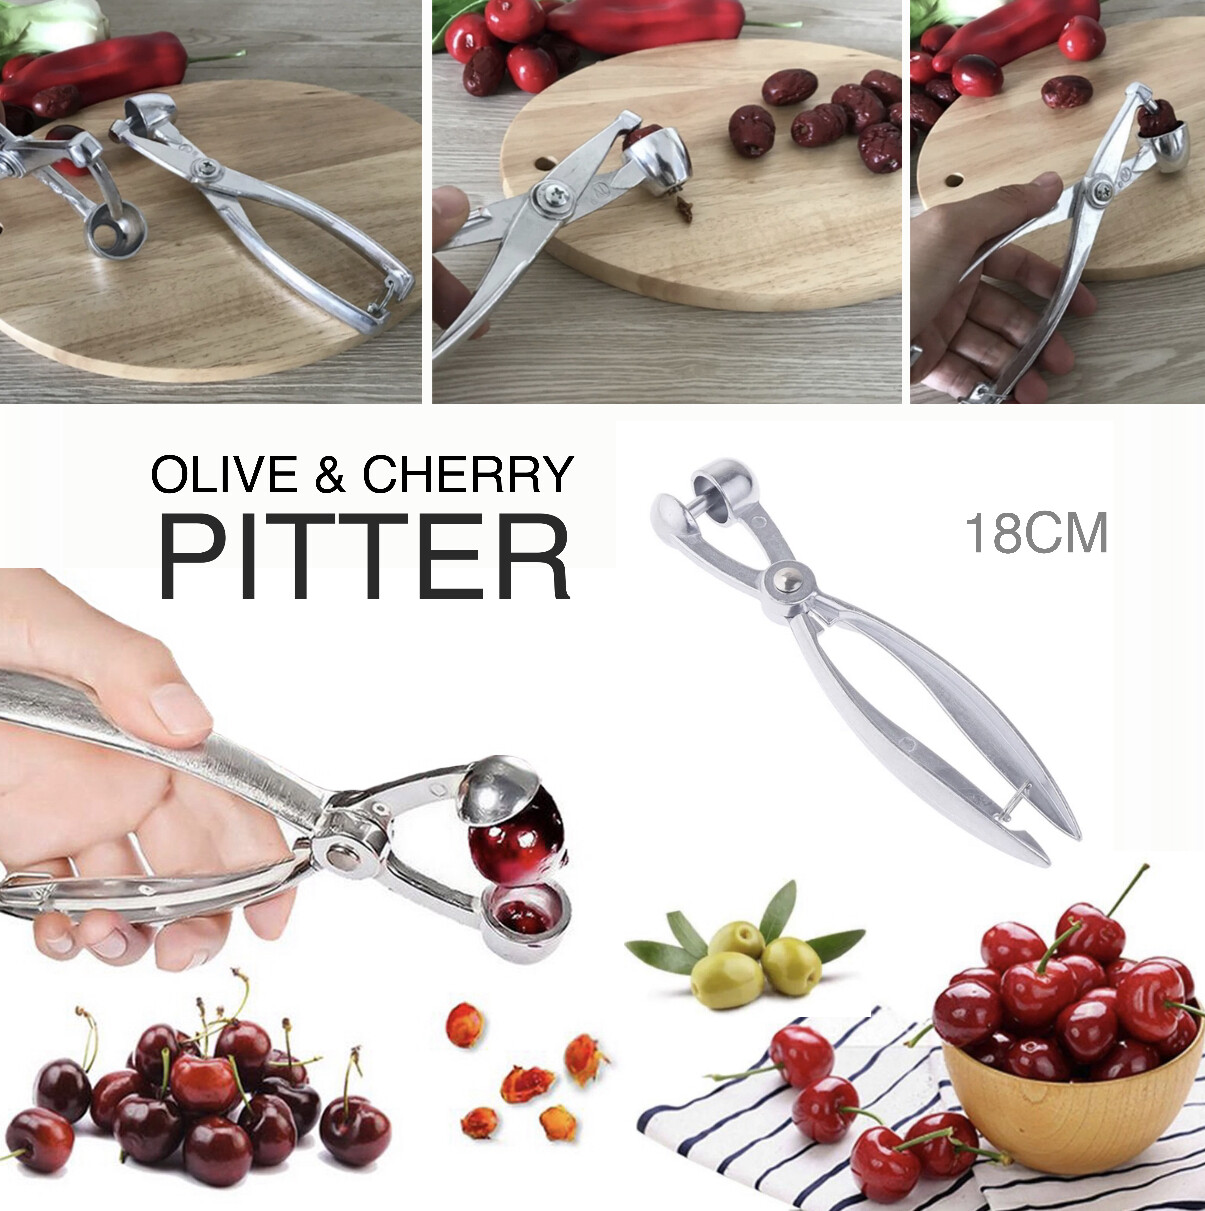 Olive & Cherry Pitter